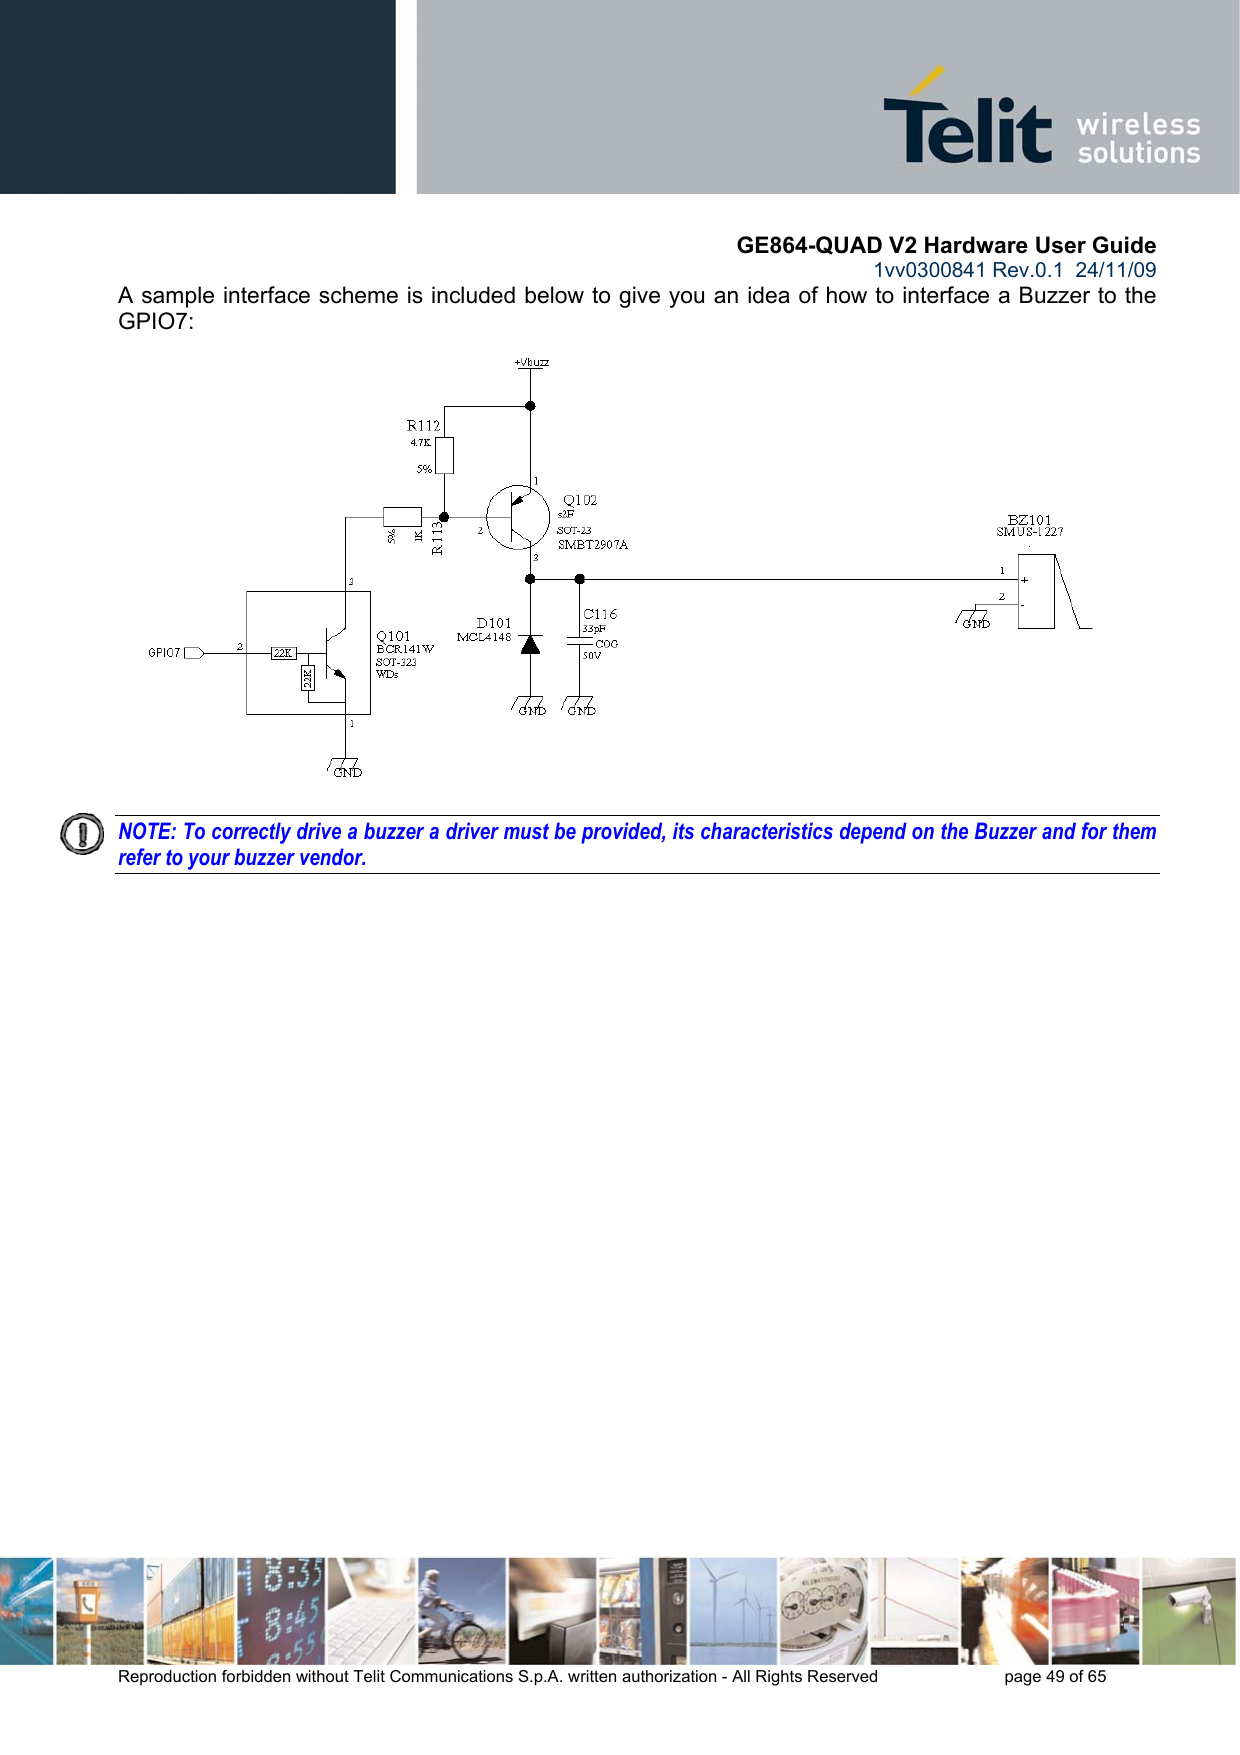       GE864-QUAD V2 Hardware User Guide 1vv0300841 Rev.0.1  24/11/09      Reproduction forbidden without Telit Communications S.p.A. written authorization - All Rights Reserved    page 49 of 65  A sample interface scheme is included below to give you an idea of how to interface a Buzzer to the GPIO7:  NOTE: To correctly drive a buzzer a driver must be provided, its characteristics depend on the Buzzer and for them refer to your buzzer vendor.   